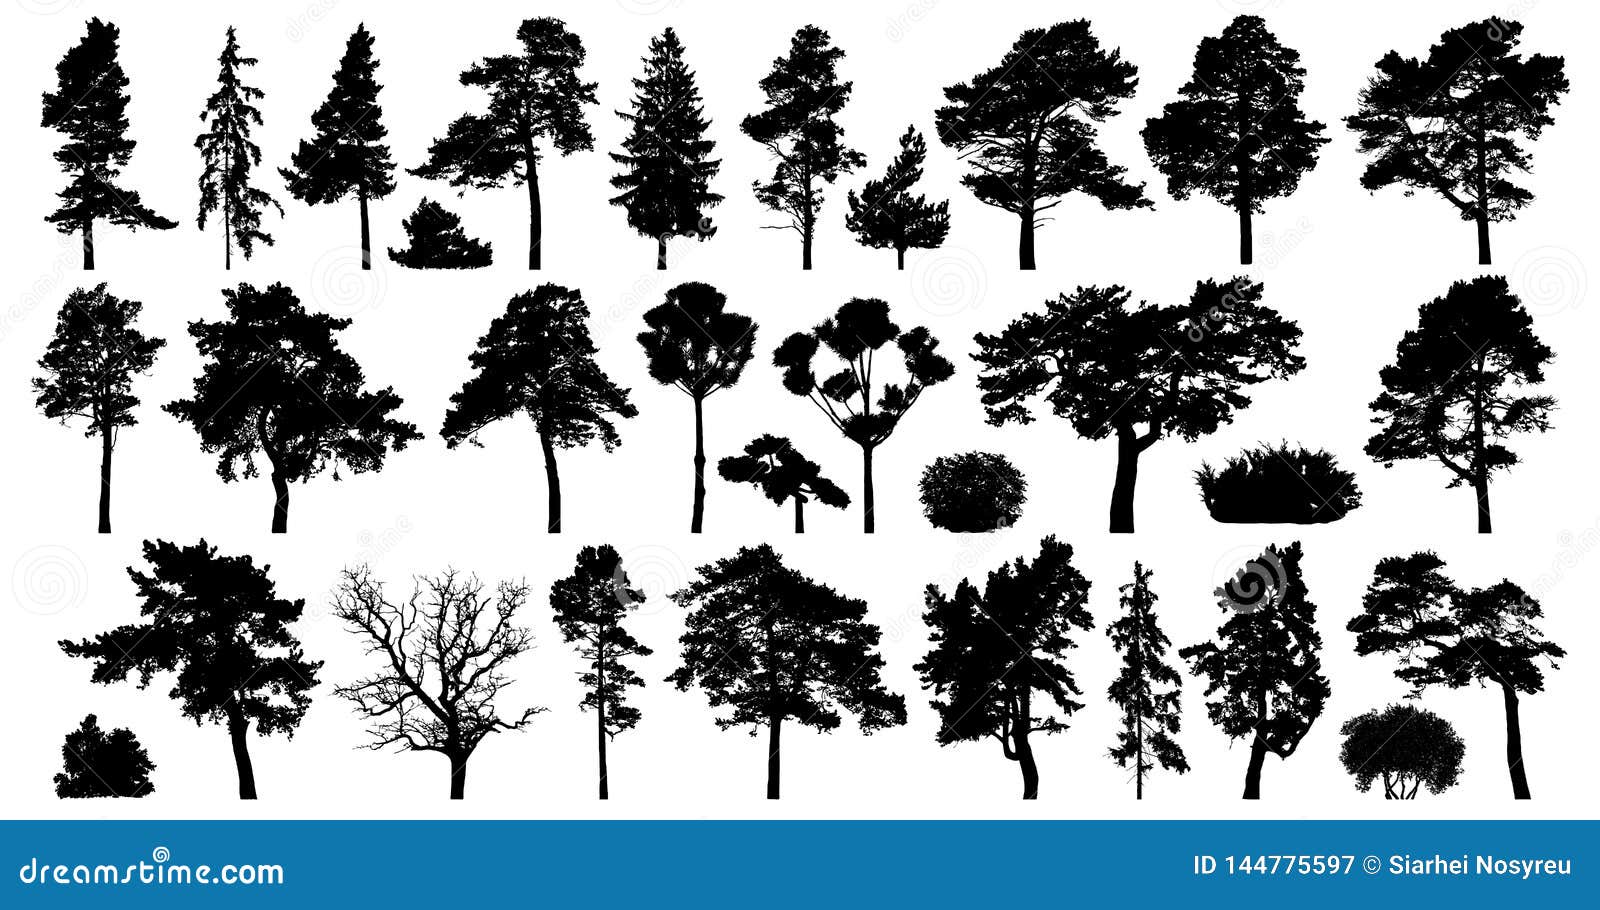 trees set  on white background. coniferous forest silhouette